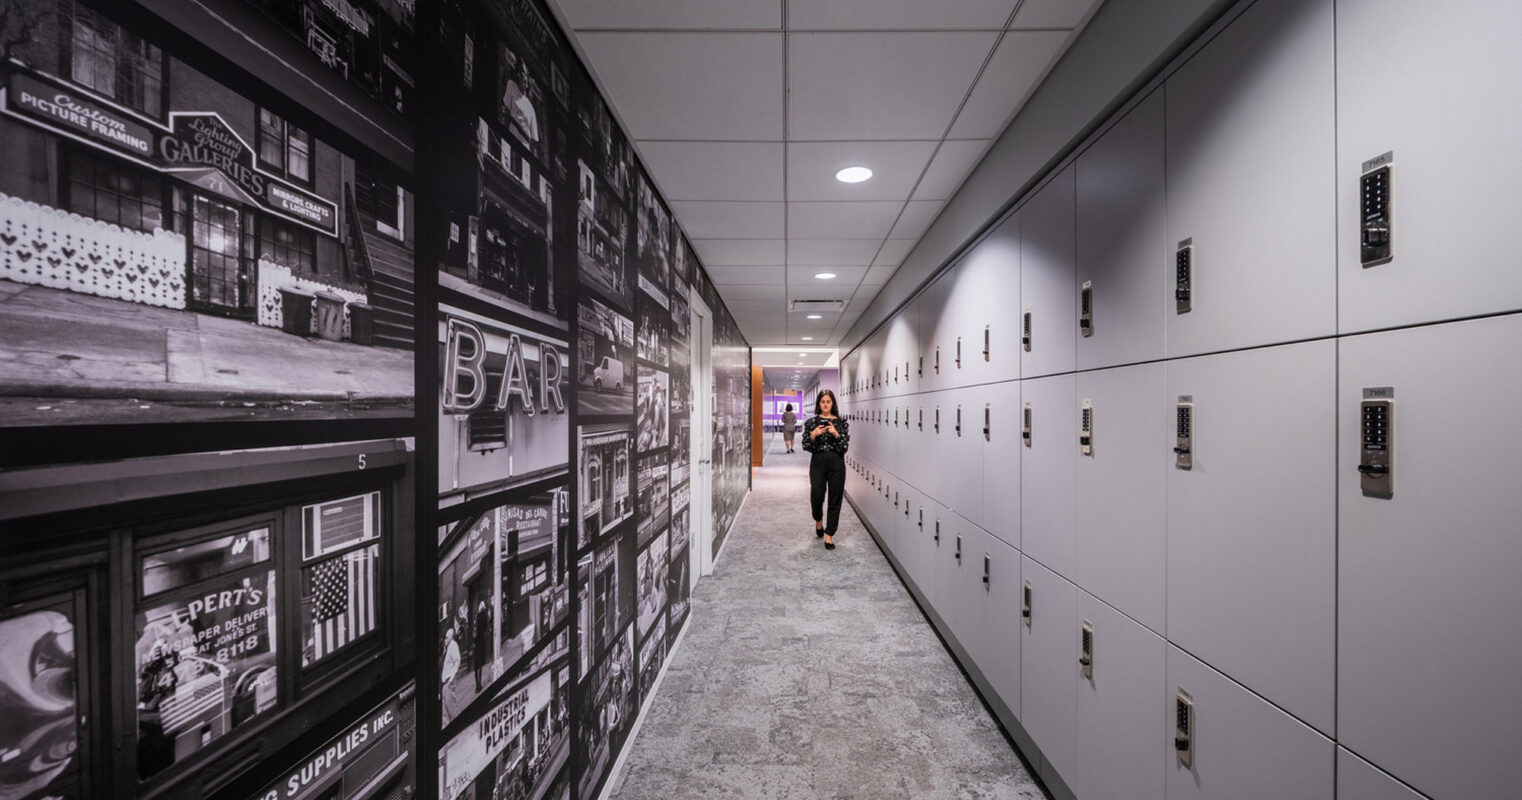 Hallway lined with sleek, white lockers on one side and a large-scale, vintage-style photographic mural on the other, creating a striking contrast. A person walks down the corridor, adding a dynamic element to the scene.